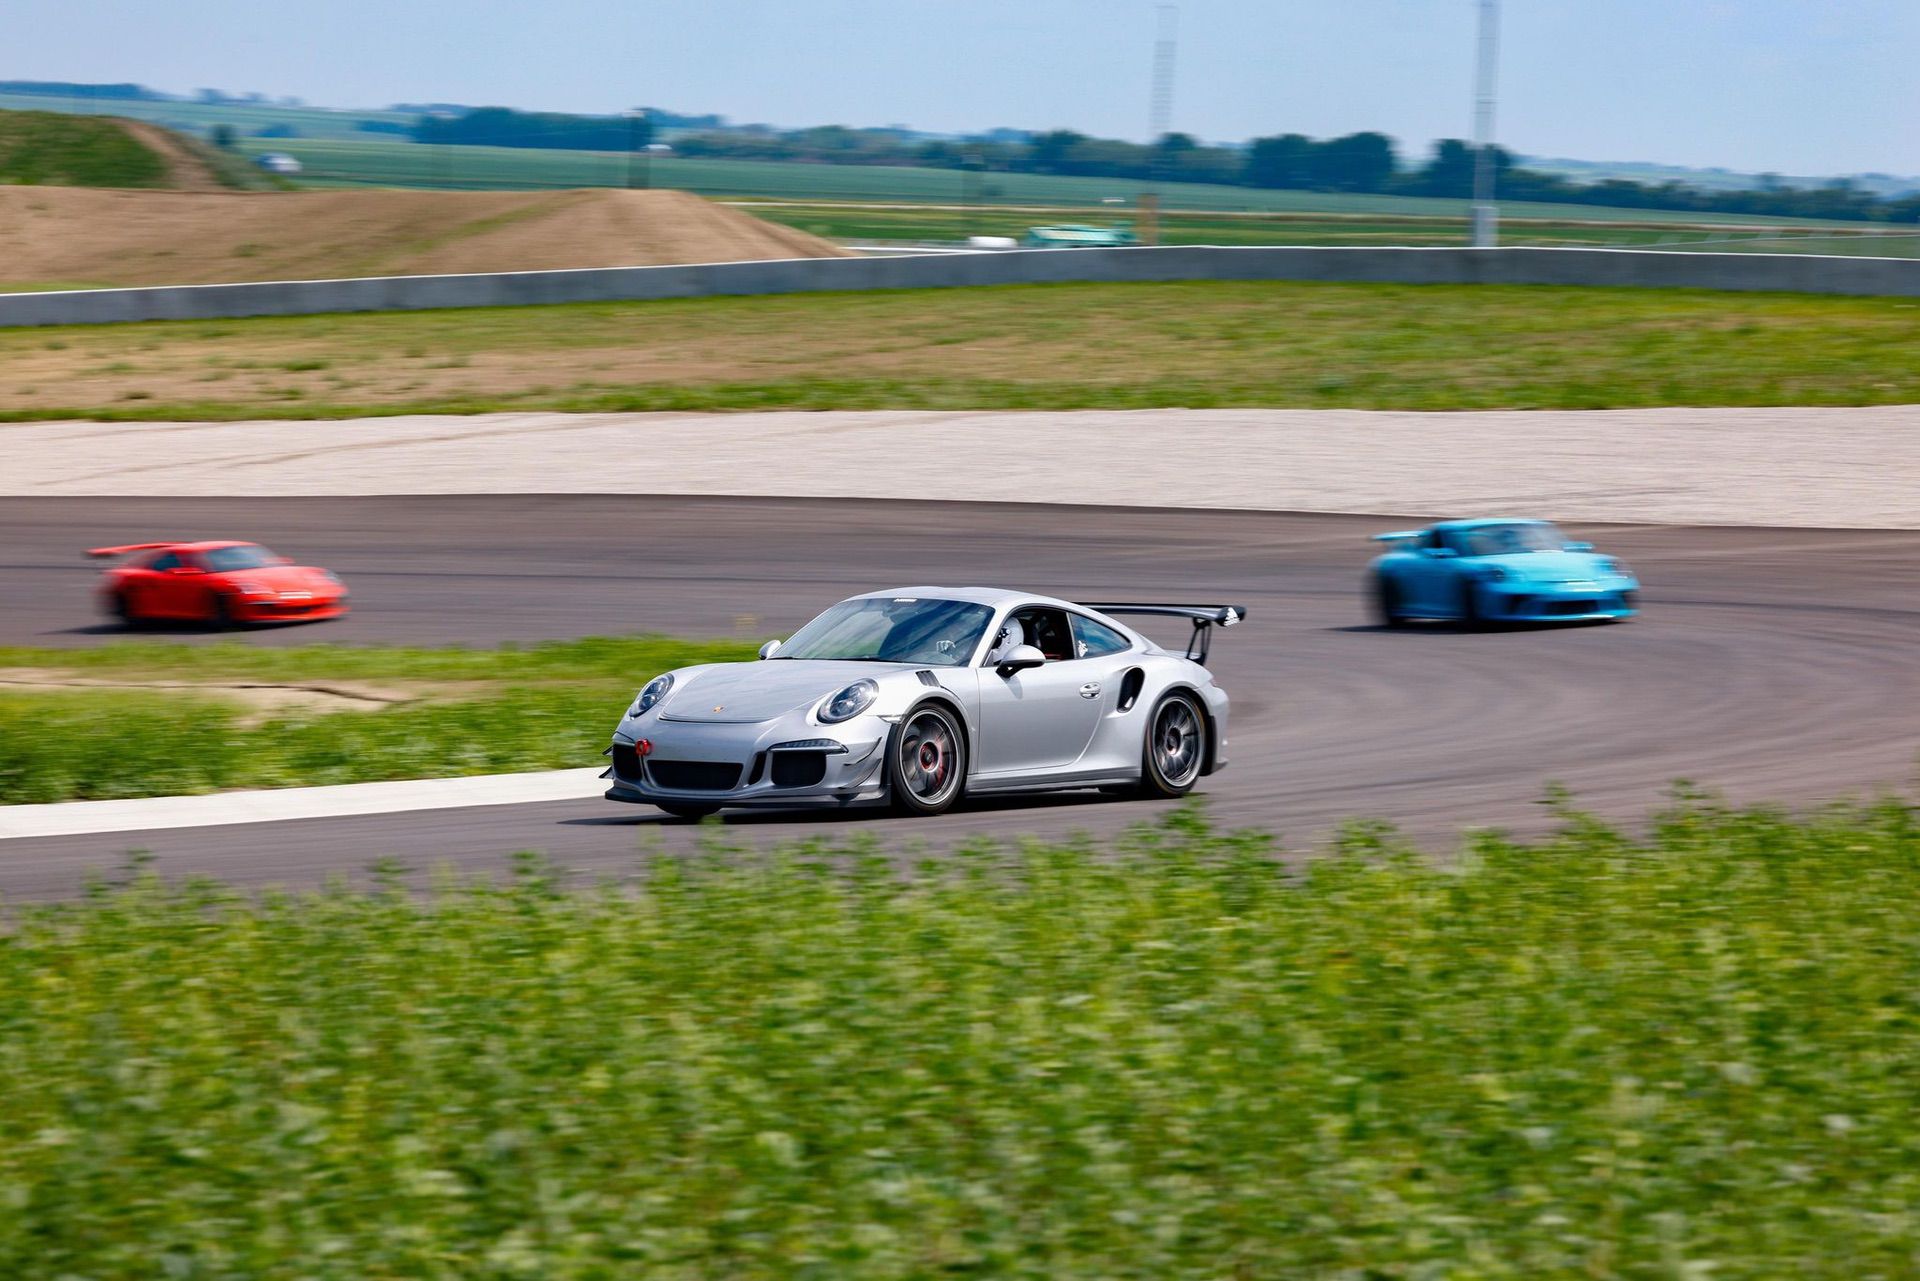 Porsche ahead of other cars on track during high performance driving event